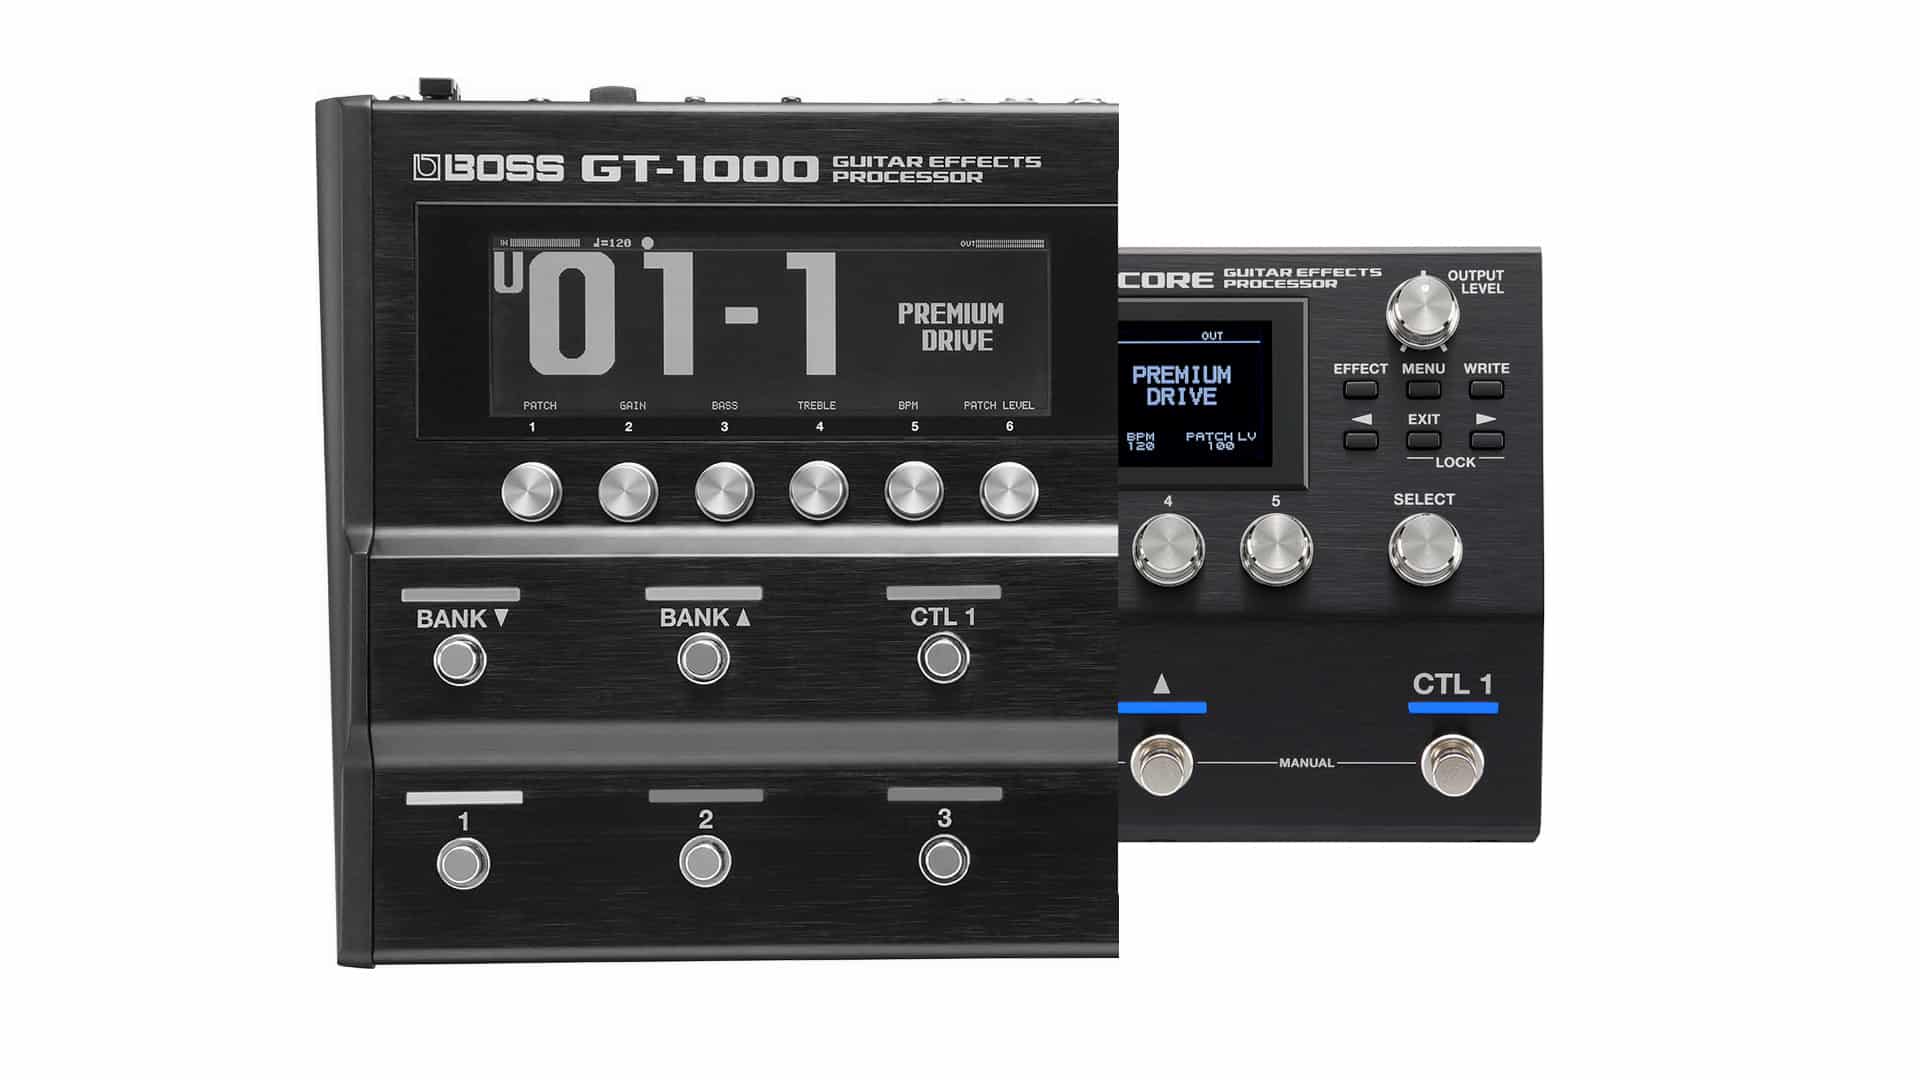 The Boss GT-1000CORE - Flagship Performance in a Compact Box